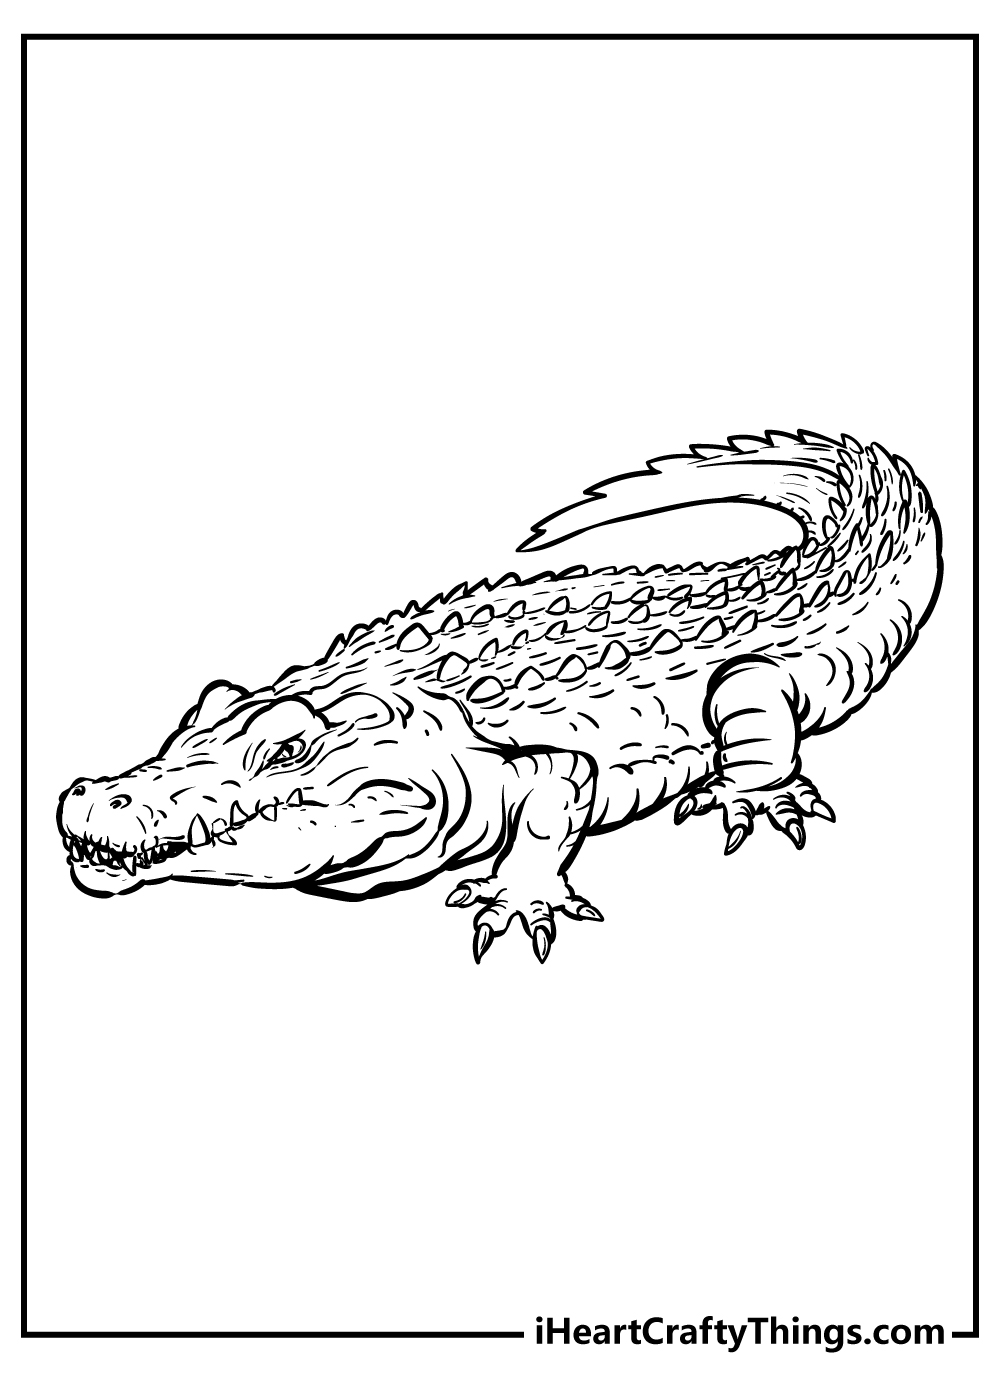 Zoo Animals Coloring Sheet for children free download